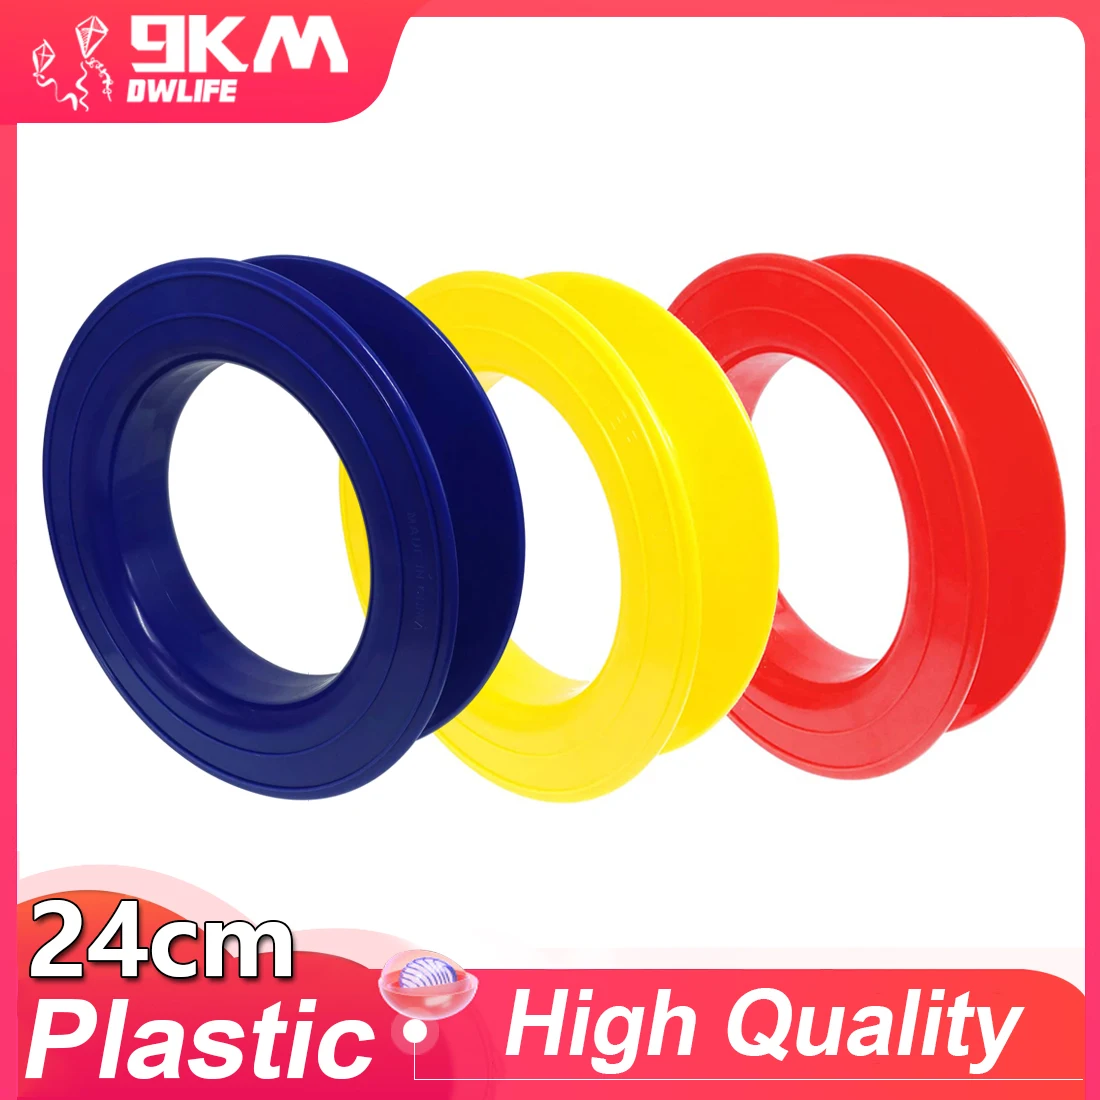 9KM DWLIFE 9.5in YoYo Kite Reel Winder ABS Plastic Easy for Single Line  Kites Delta Inflatable Kite with Dacron Flying Line